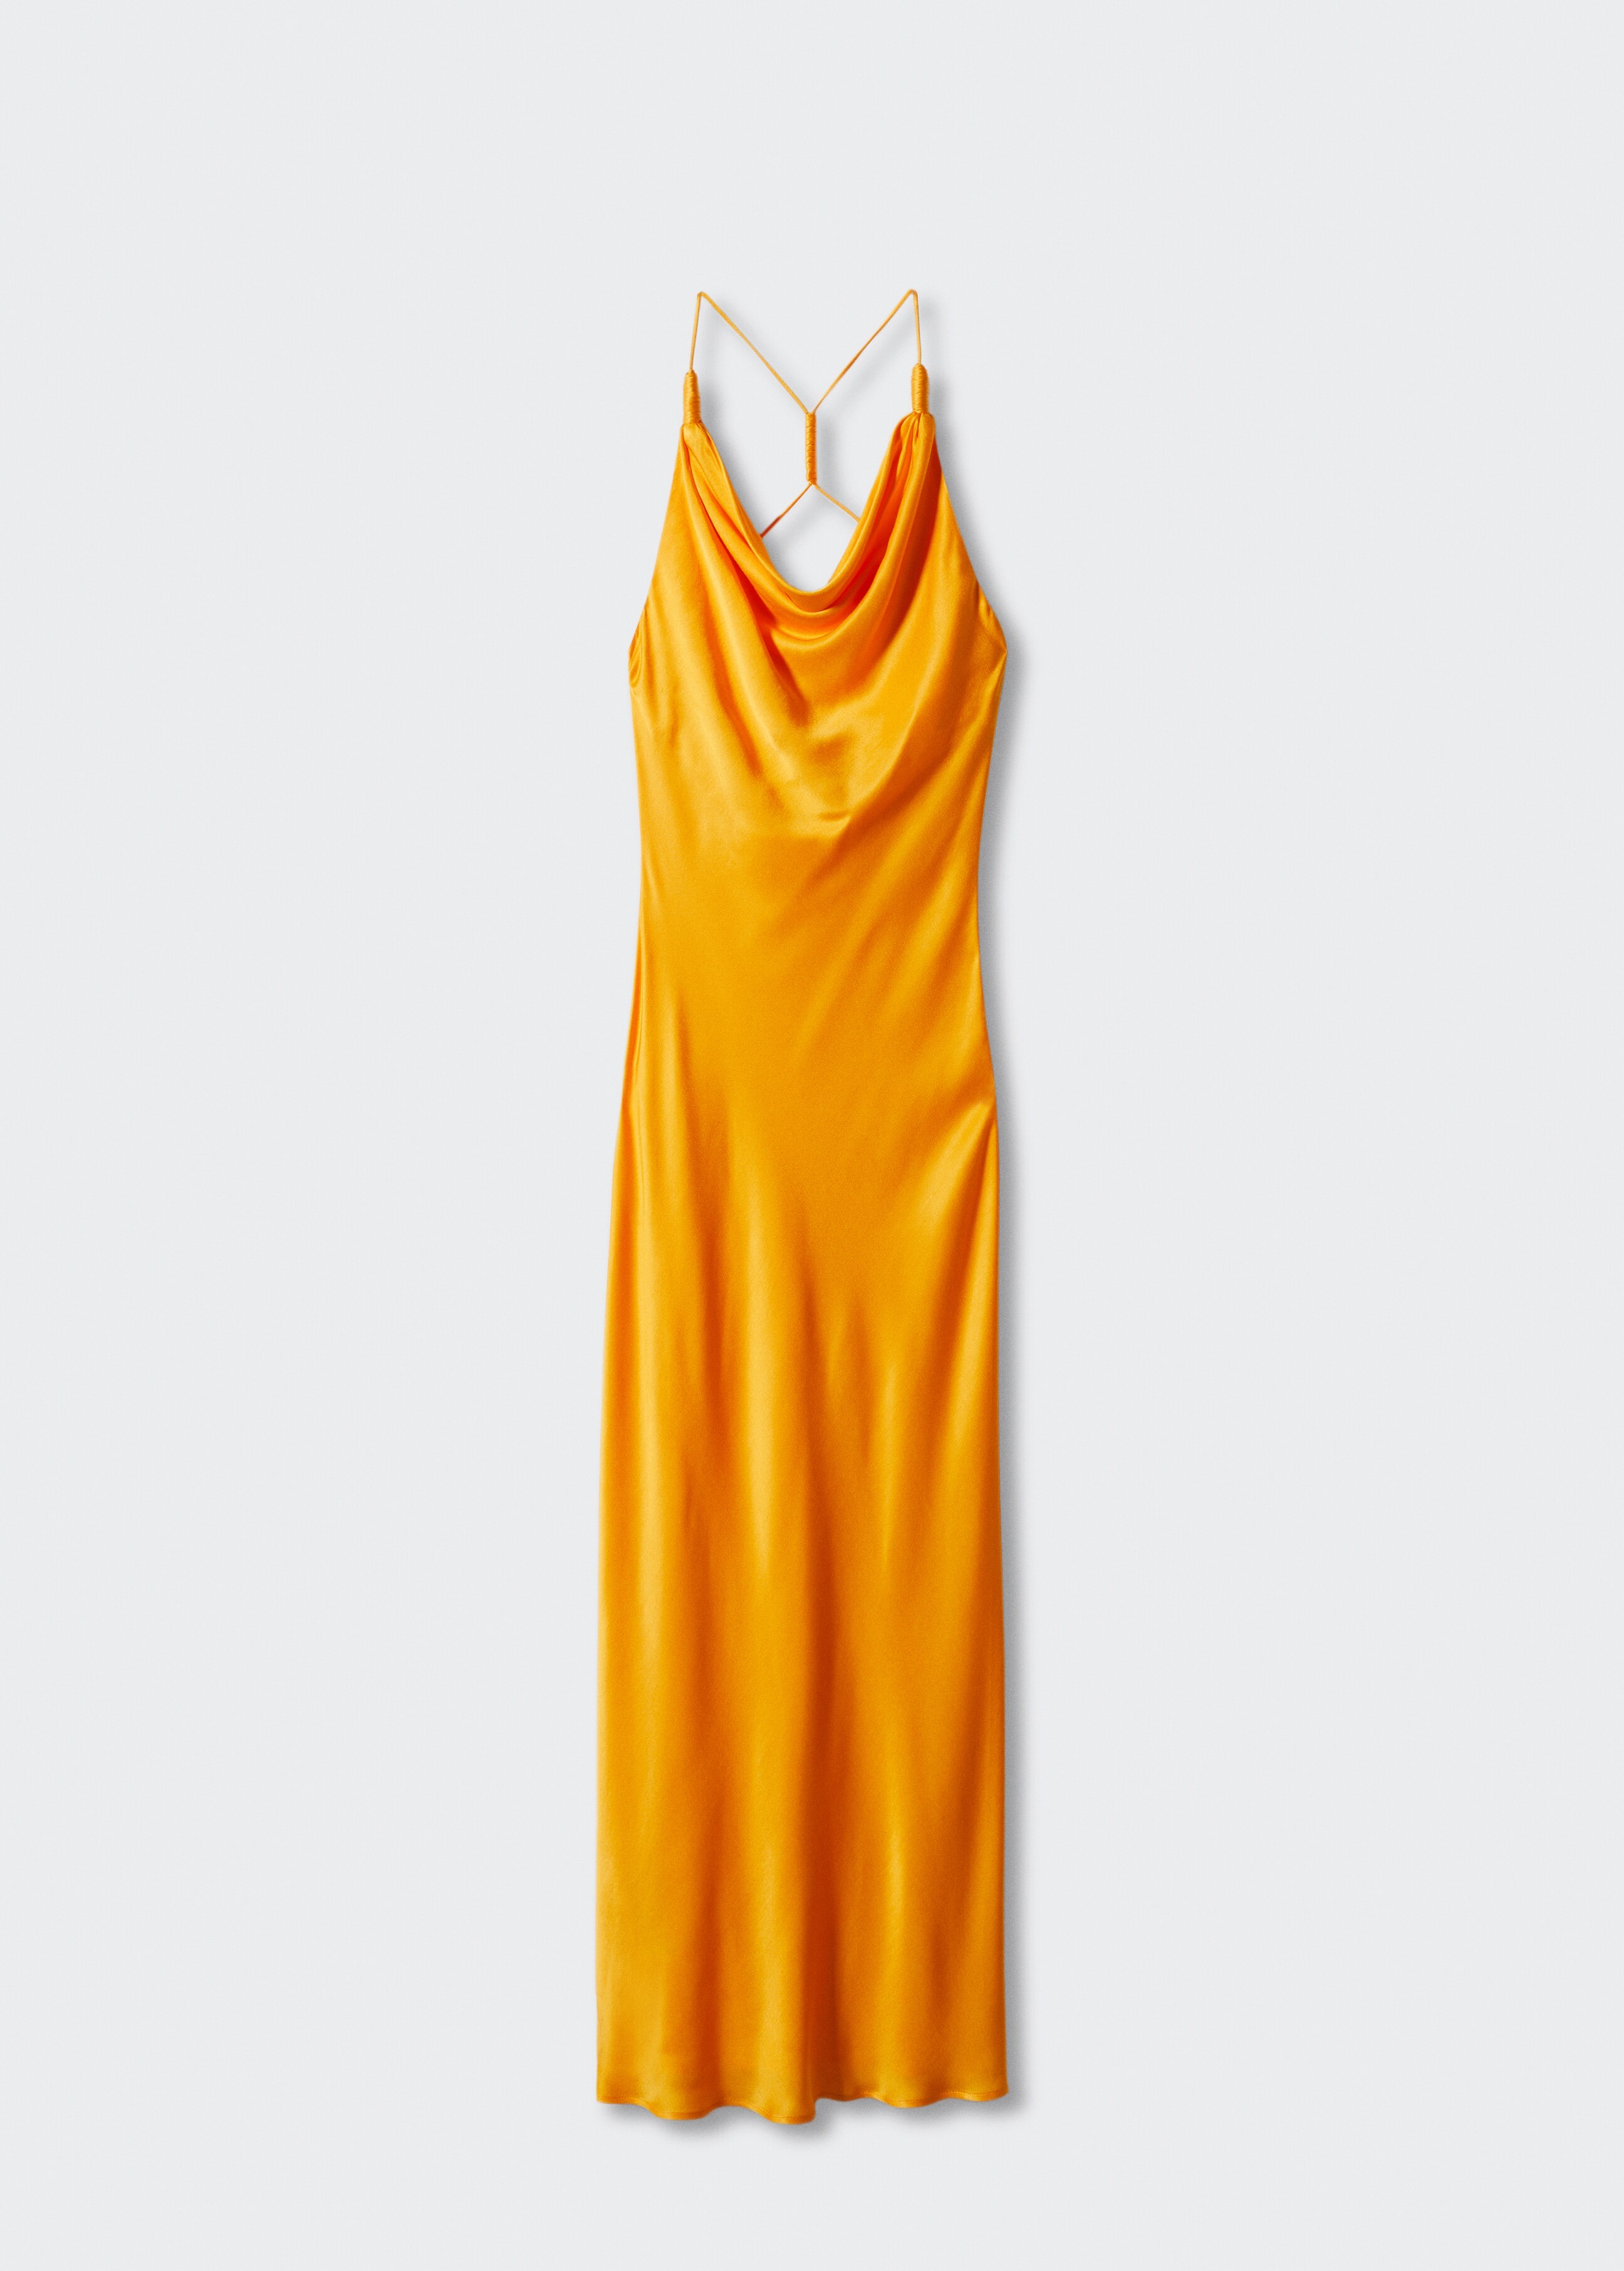 Draped neck satin dress - Article without model